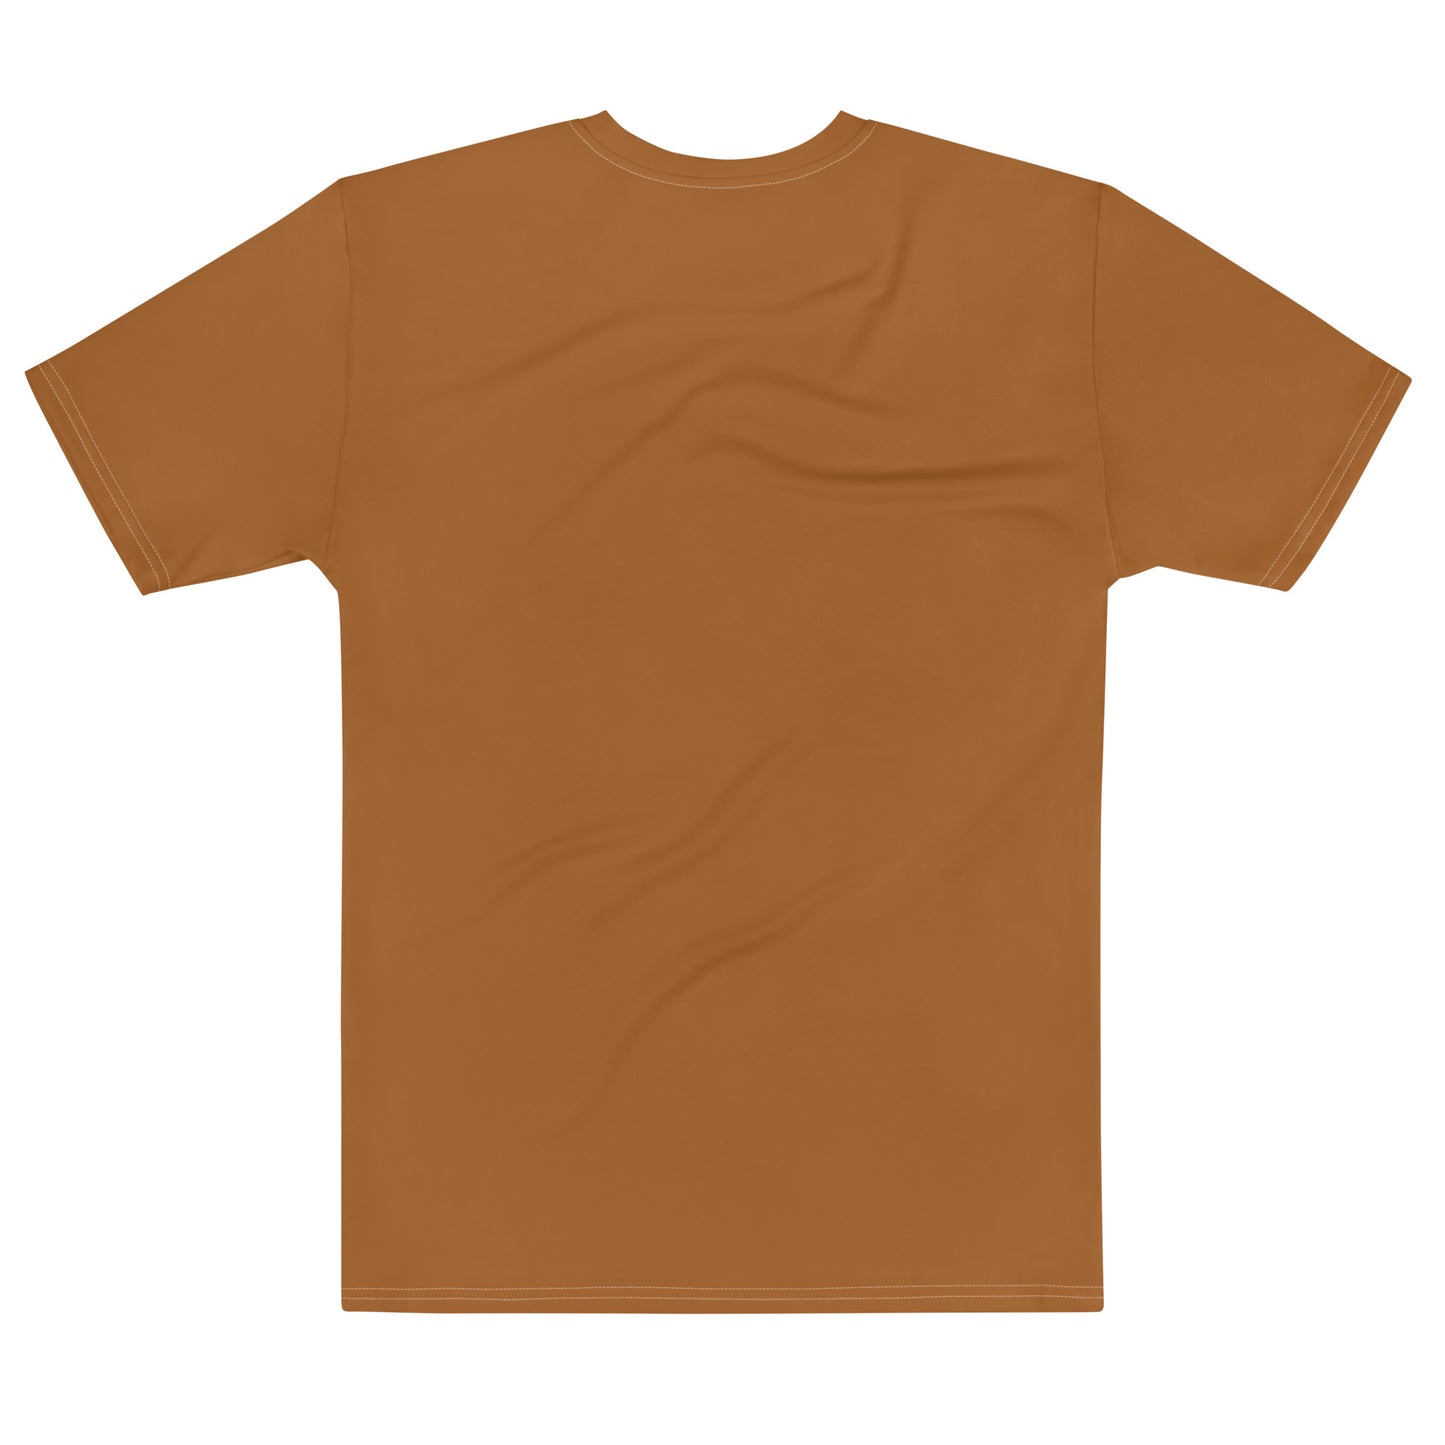 Klasik - Inspired By Taylor Swift - Sustainably Made Men’s Short Sleeve Tee